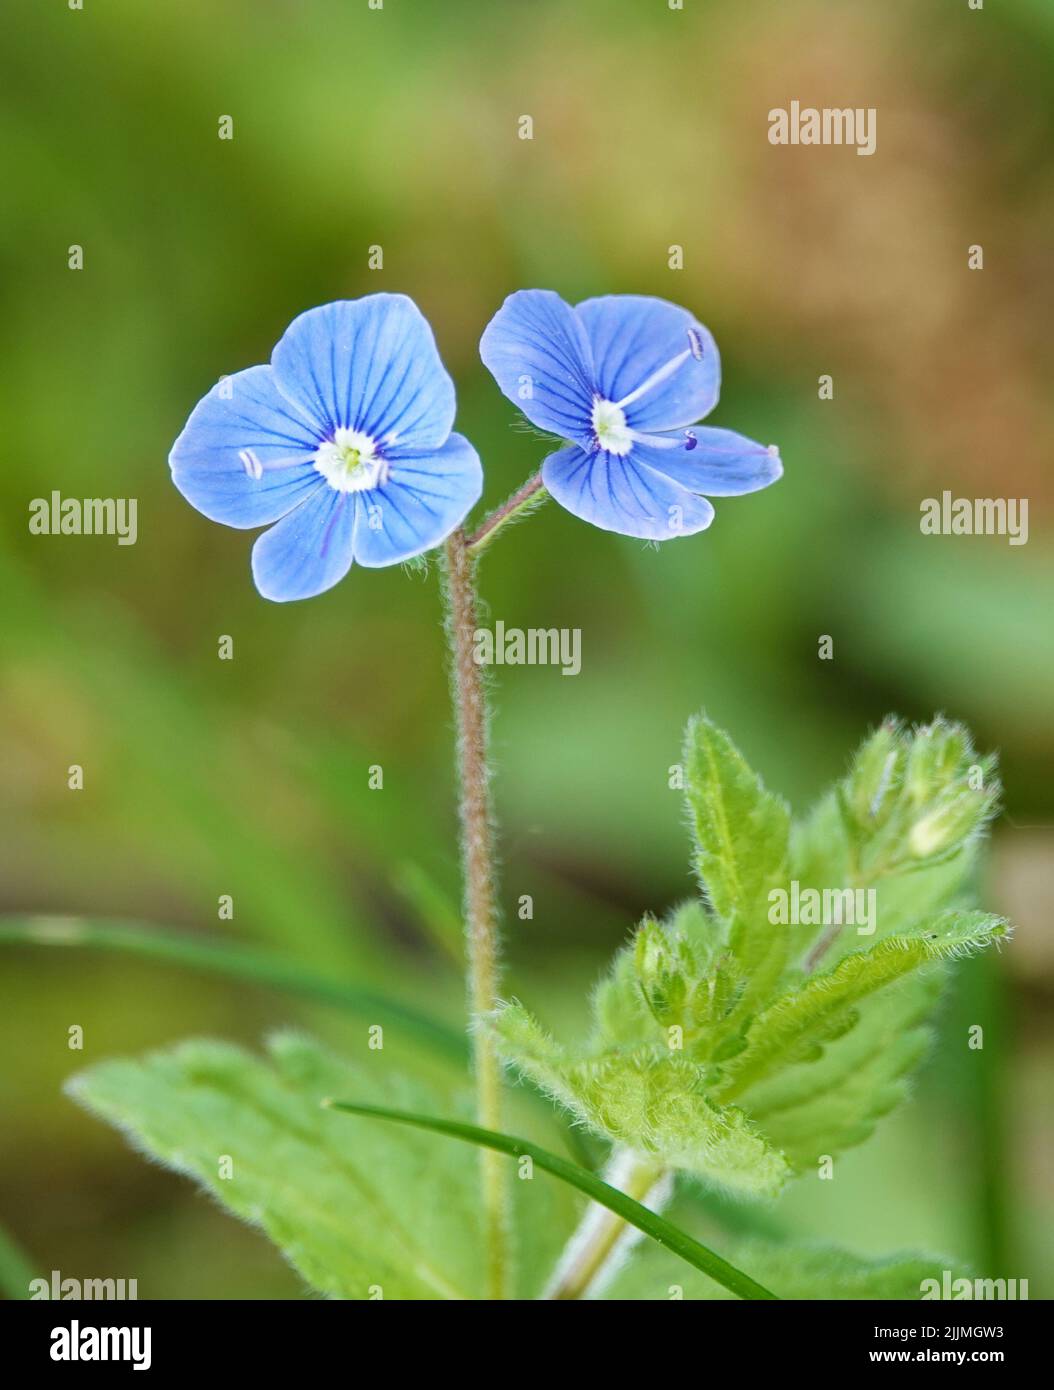 Flowers with the name Geranium or Veronica close-up beautiful and delicate Stock Photo